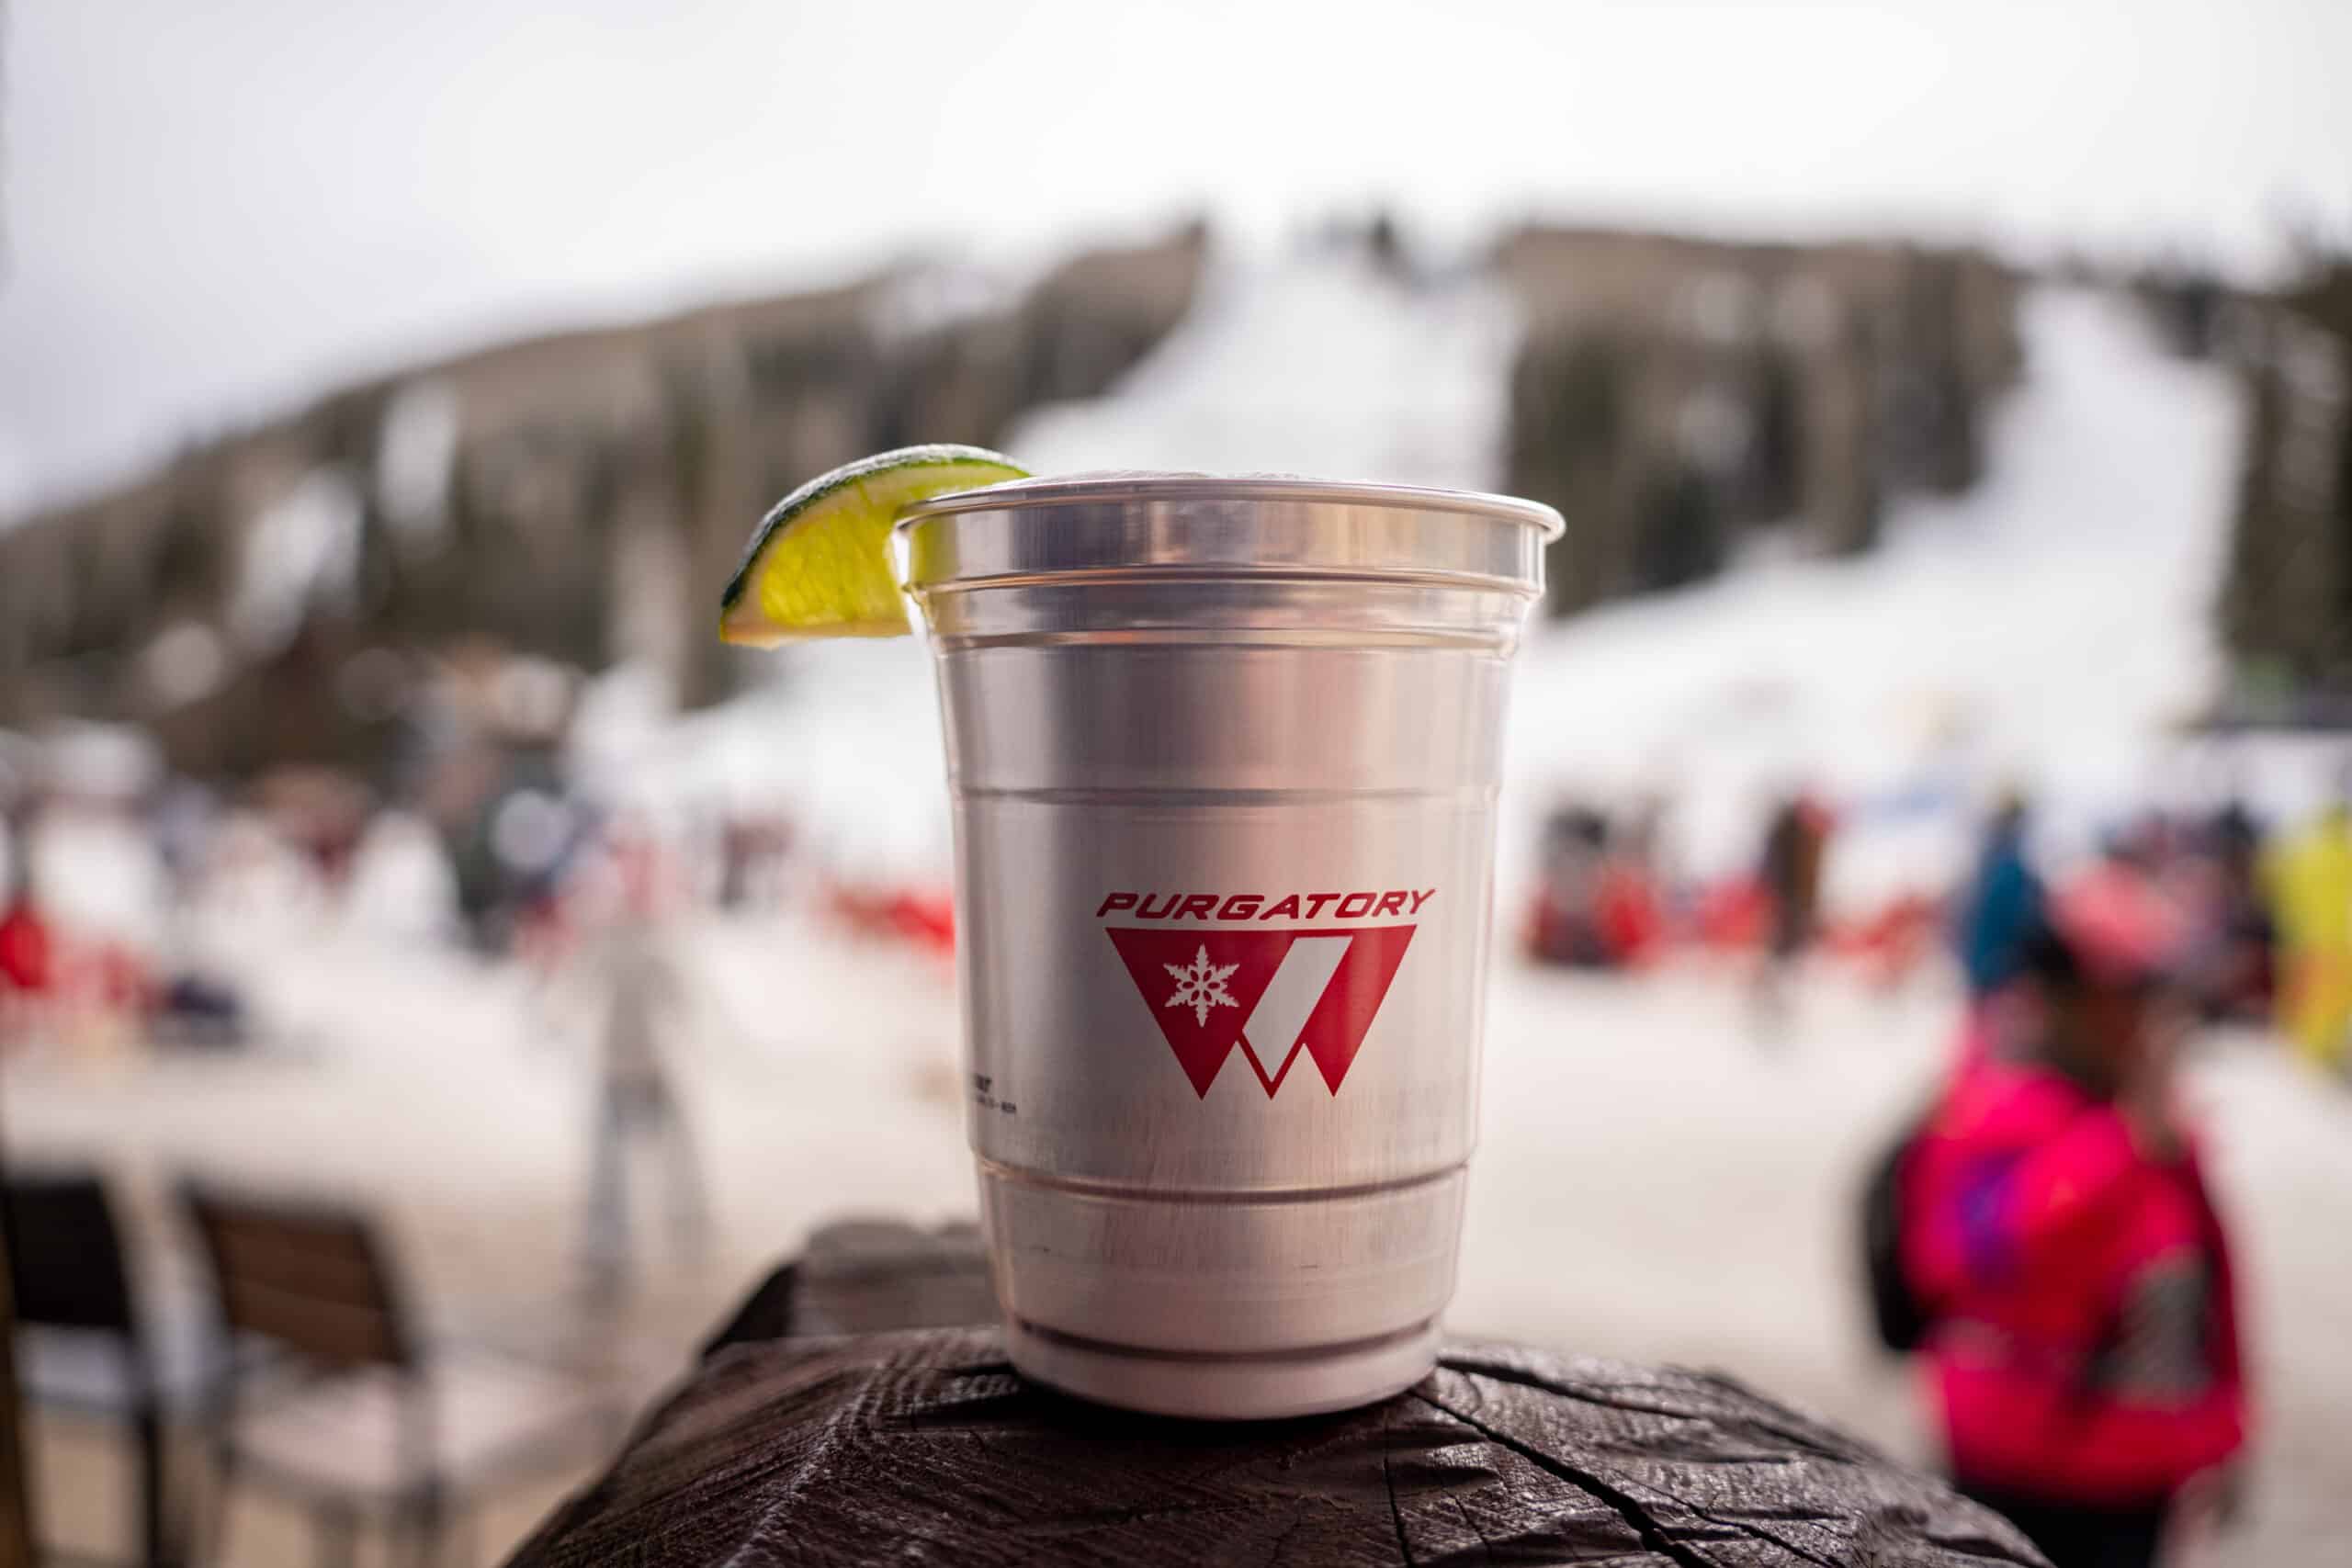 A Purgatory logo aluminum cup sits with a lime wedge in front of the snowy mountain